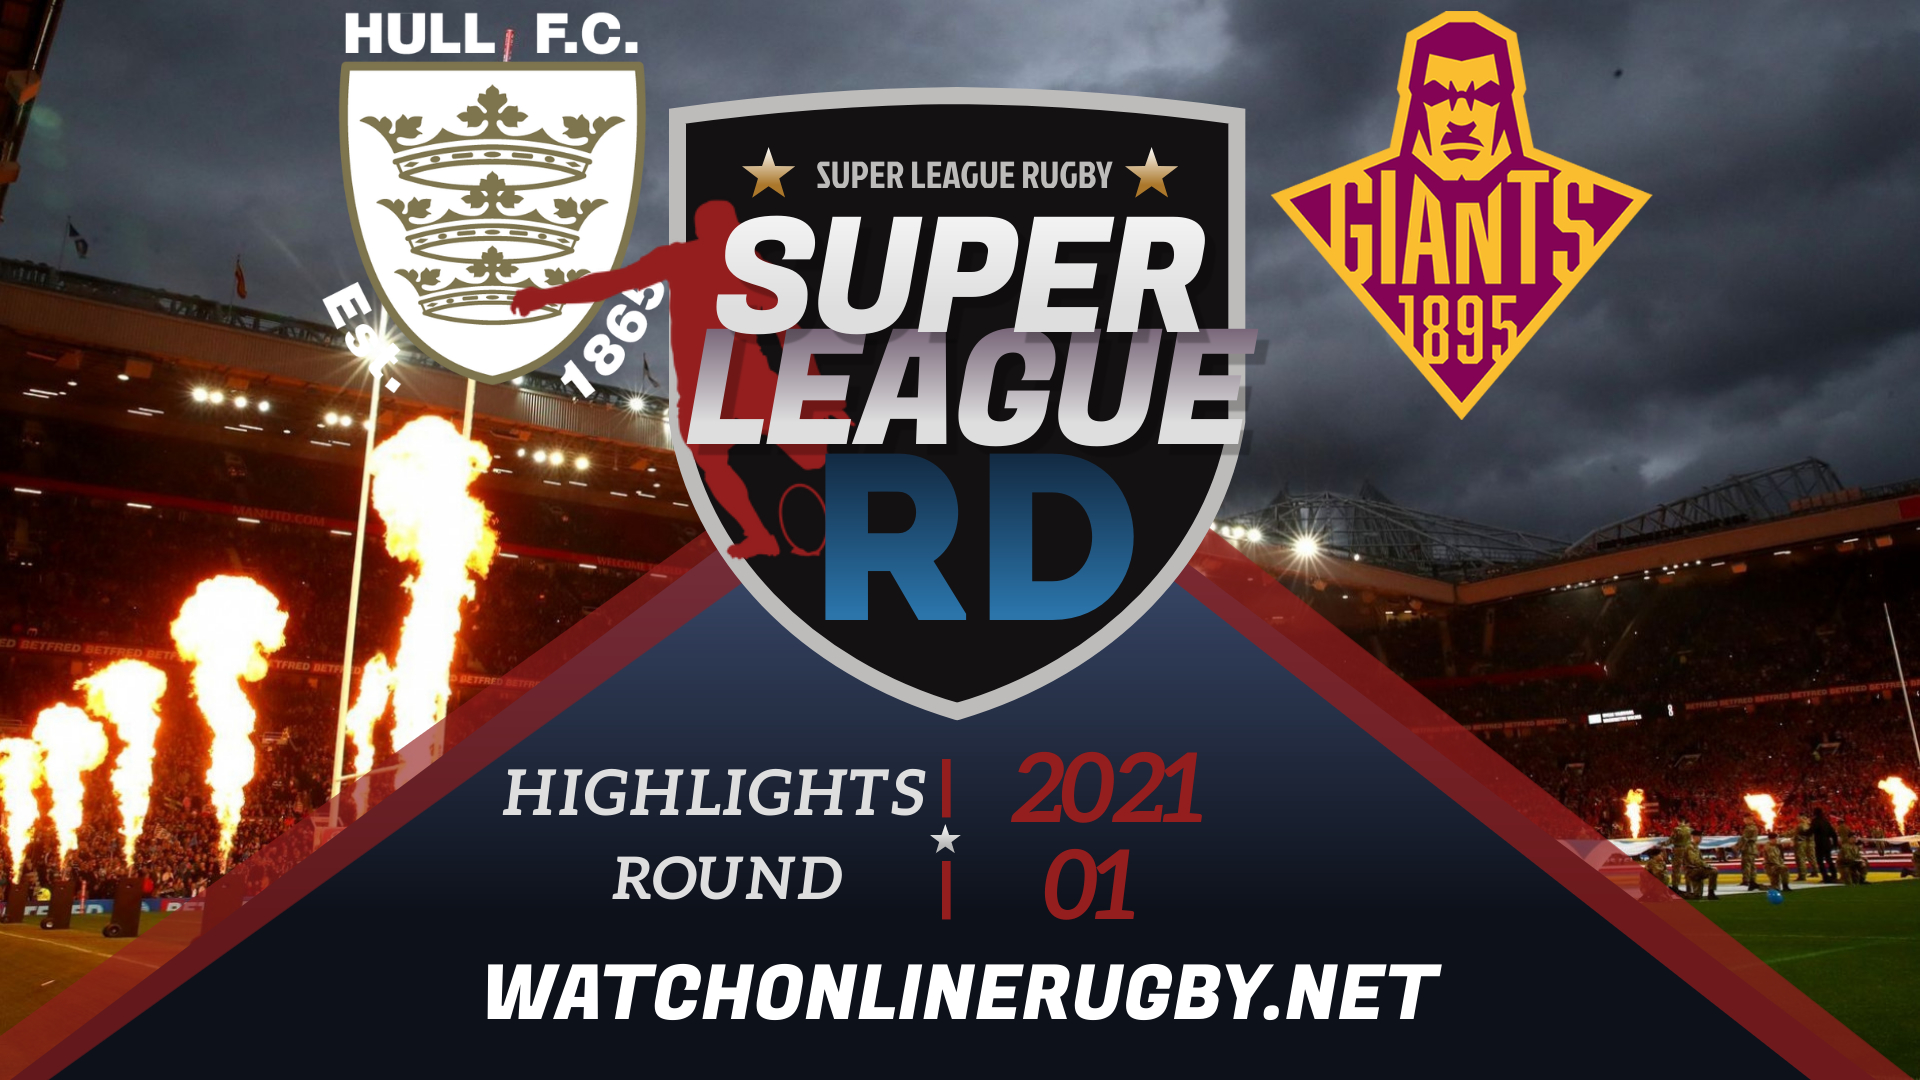 Hull FC Vs Huddersfield Giants Super League Rugby 2021 RD 1